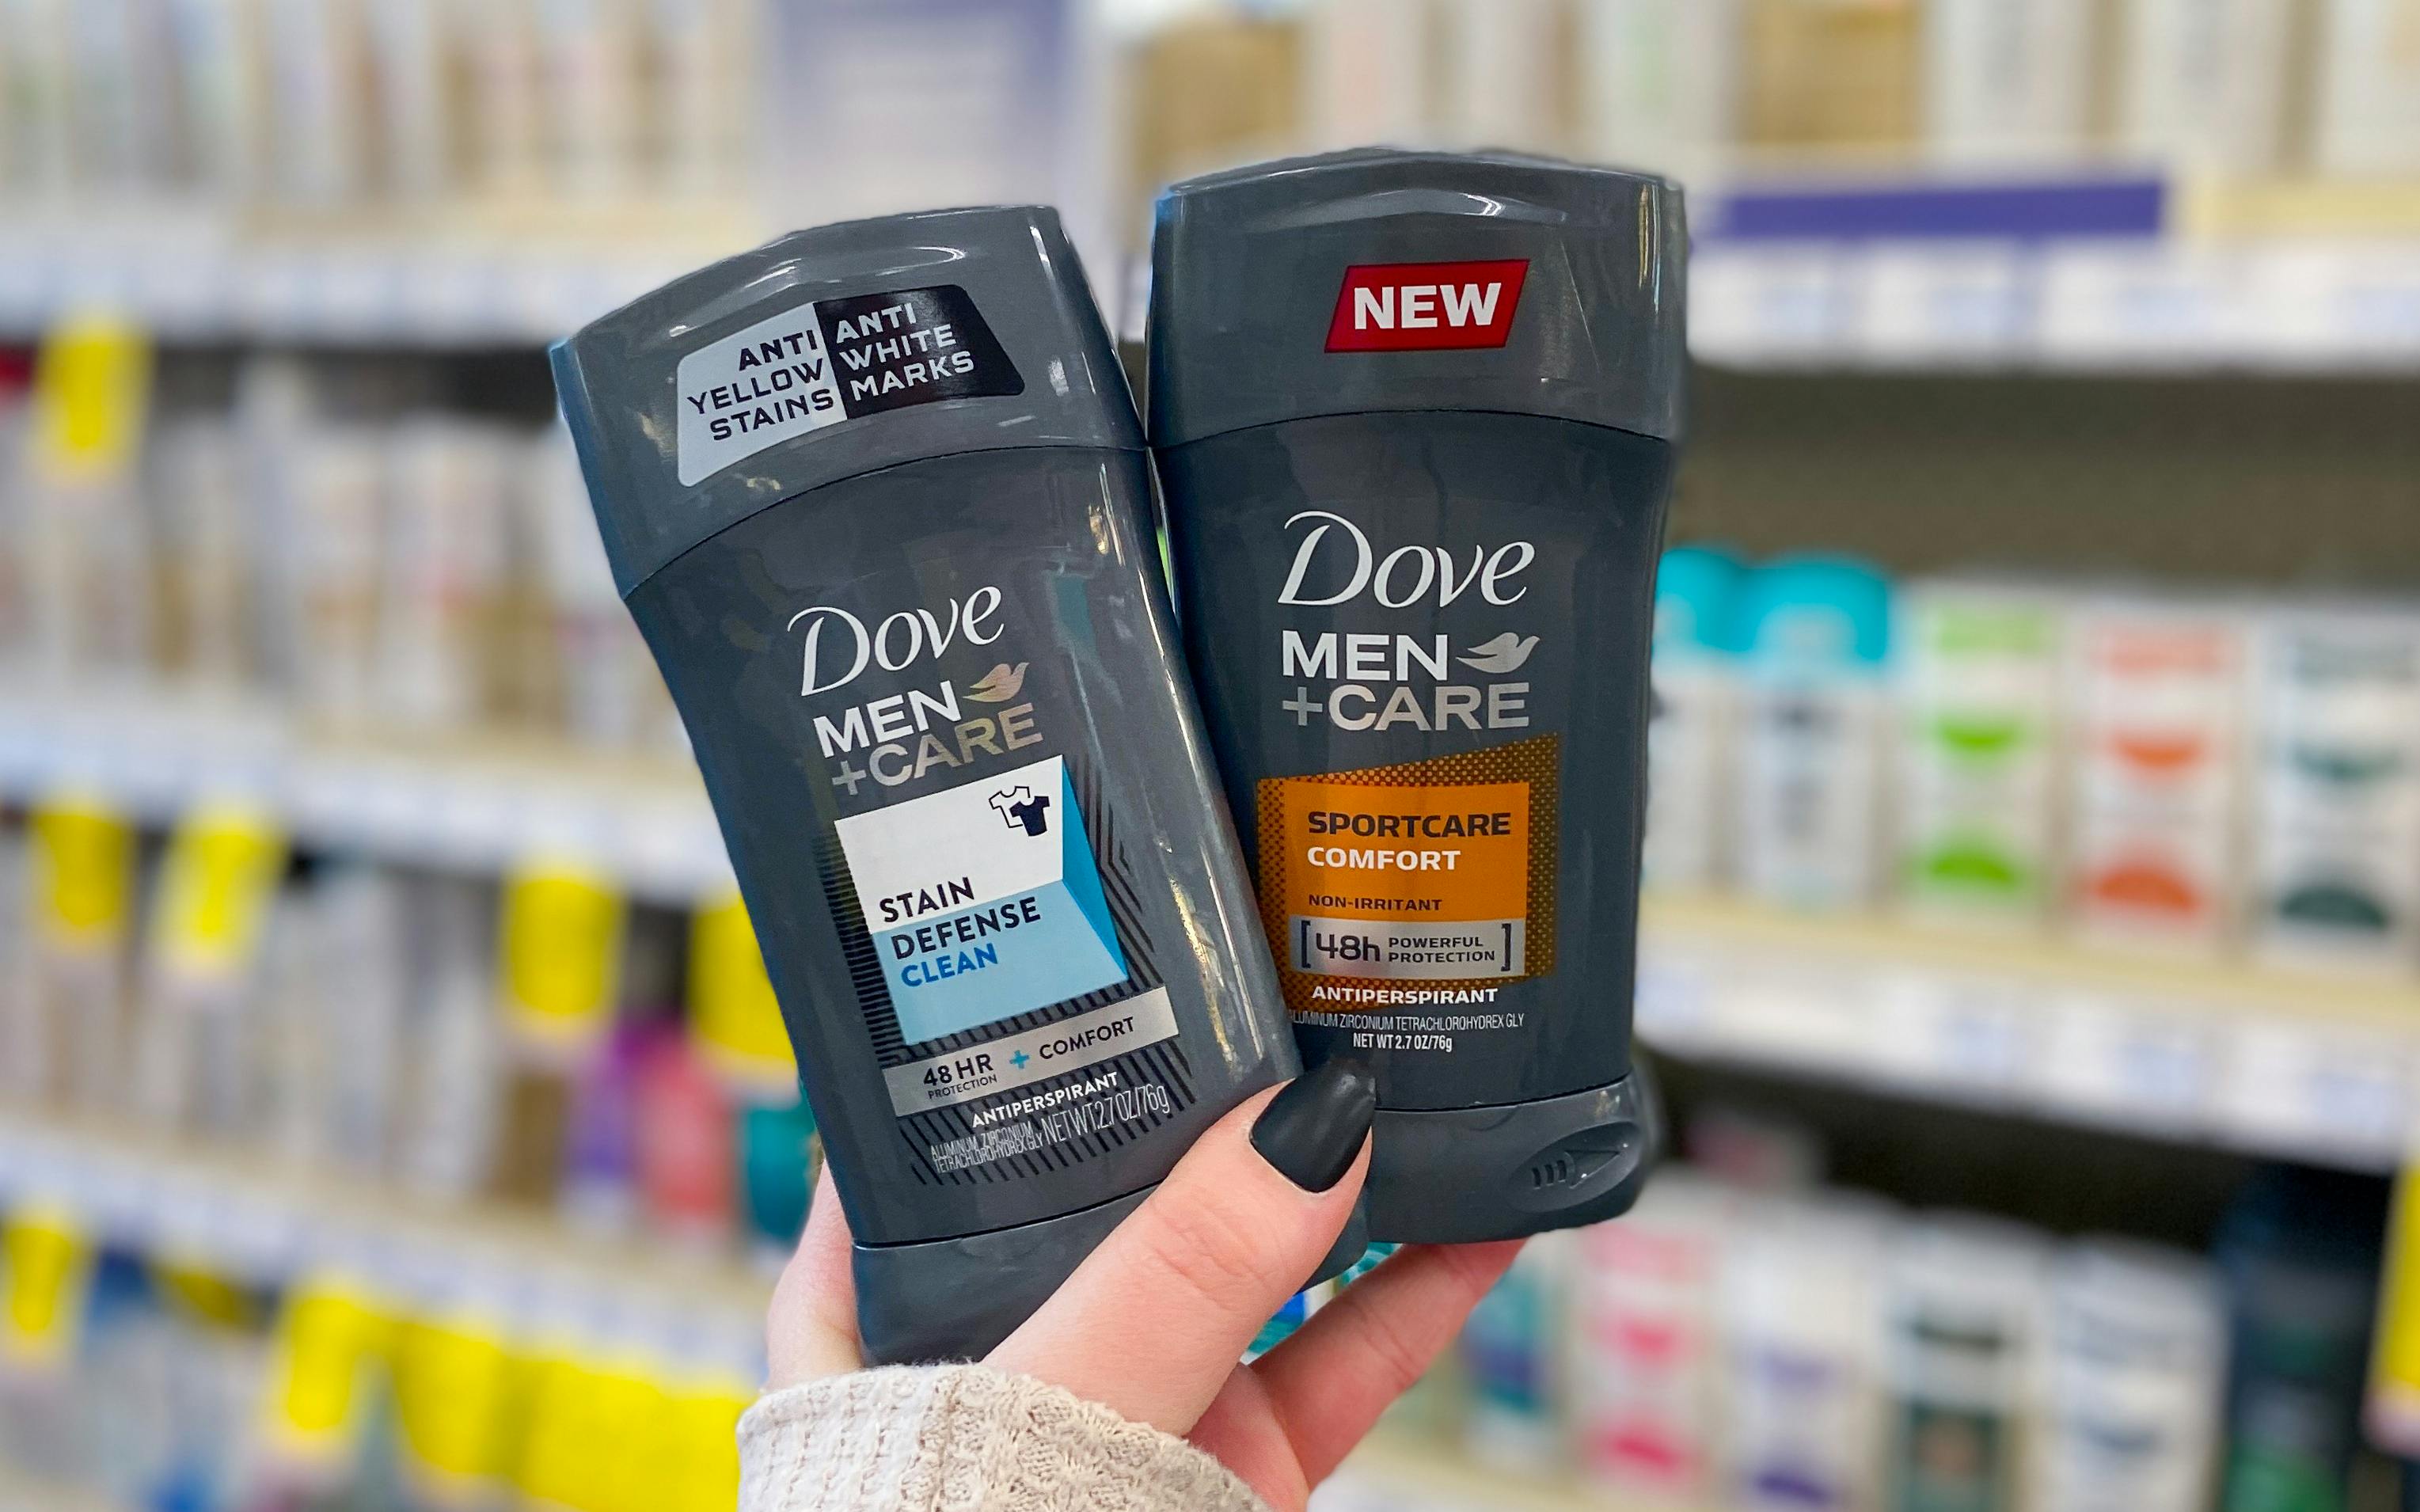 A person holding up two sticks of Dove Men +Care antiperspirant deodorant. One is Stain Defense Clean and the other is Sportcare Comfort.